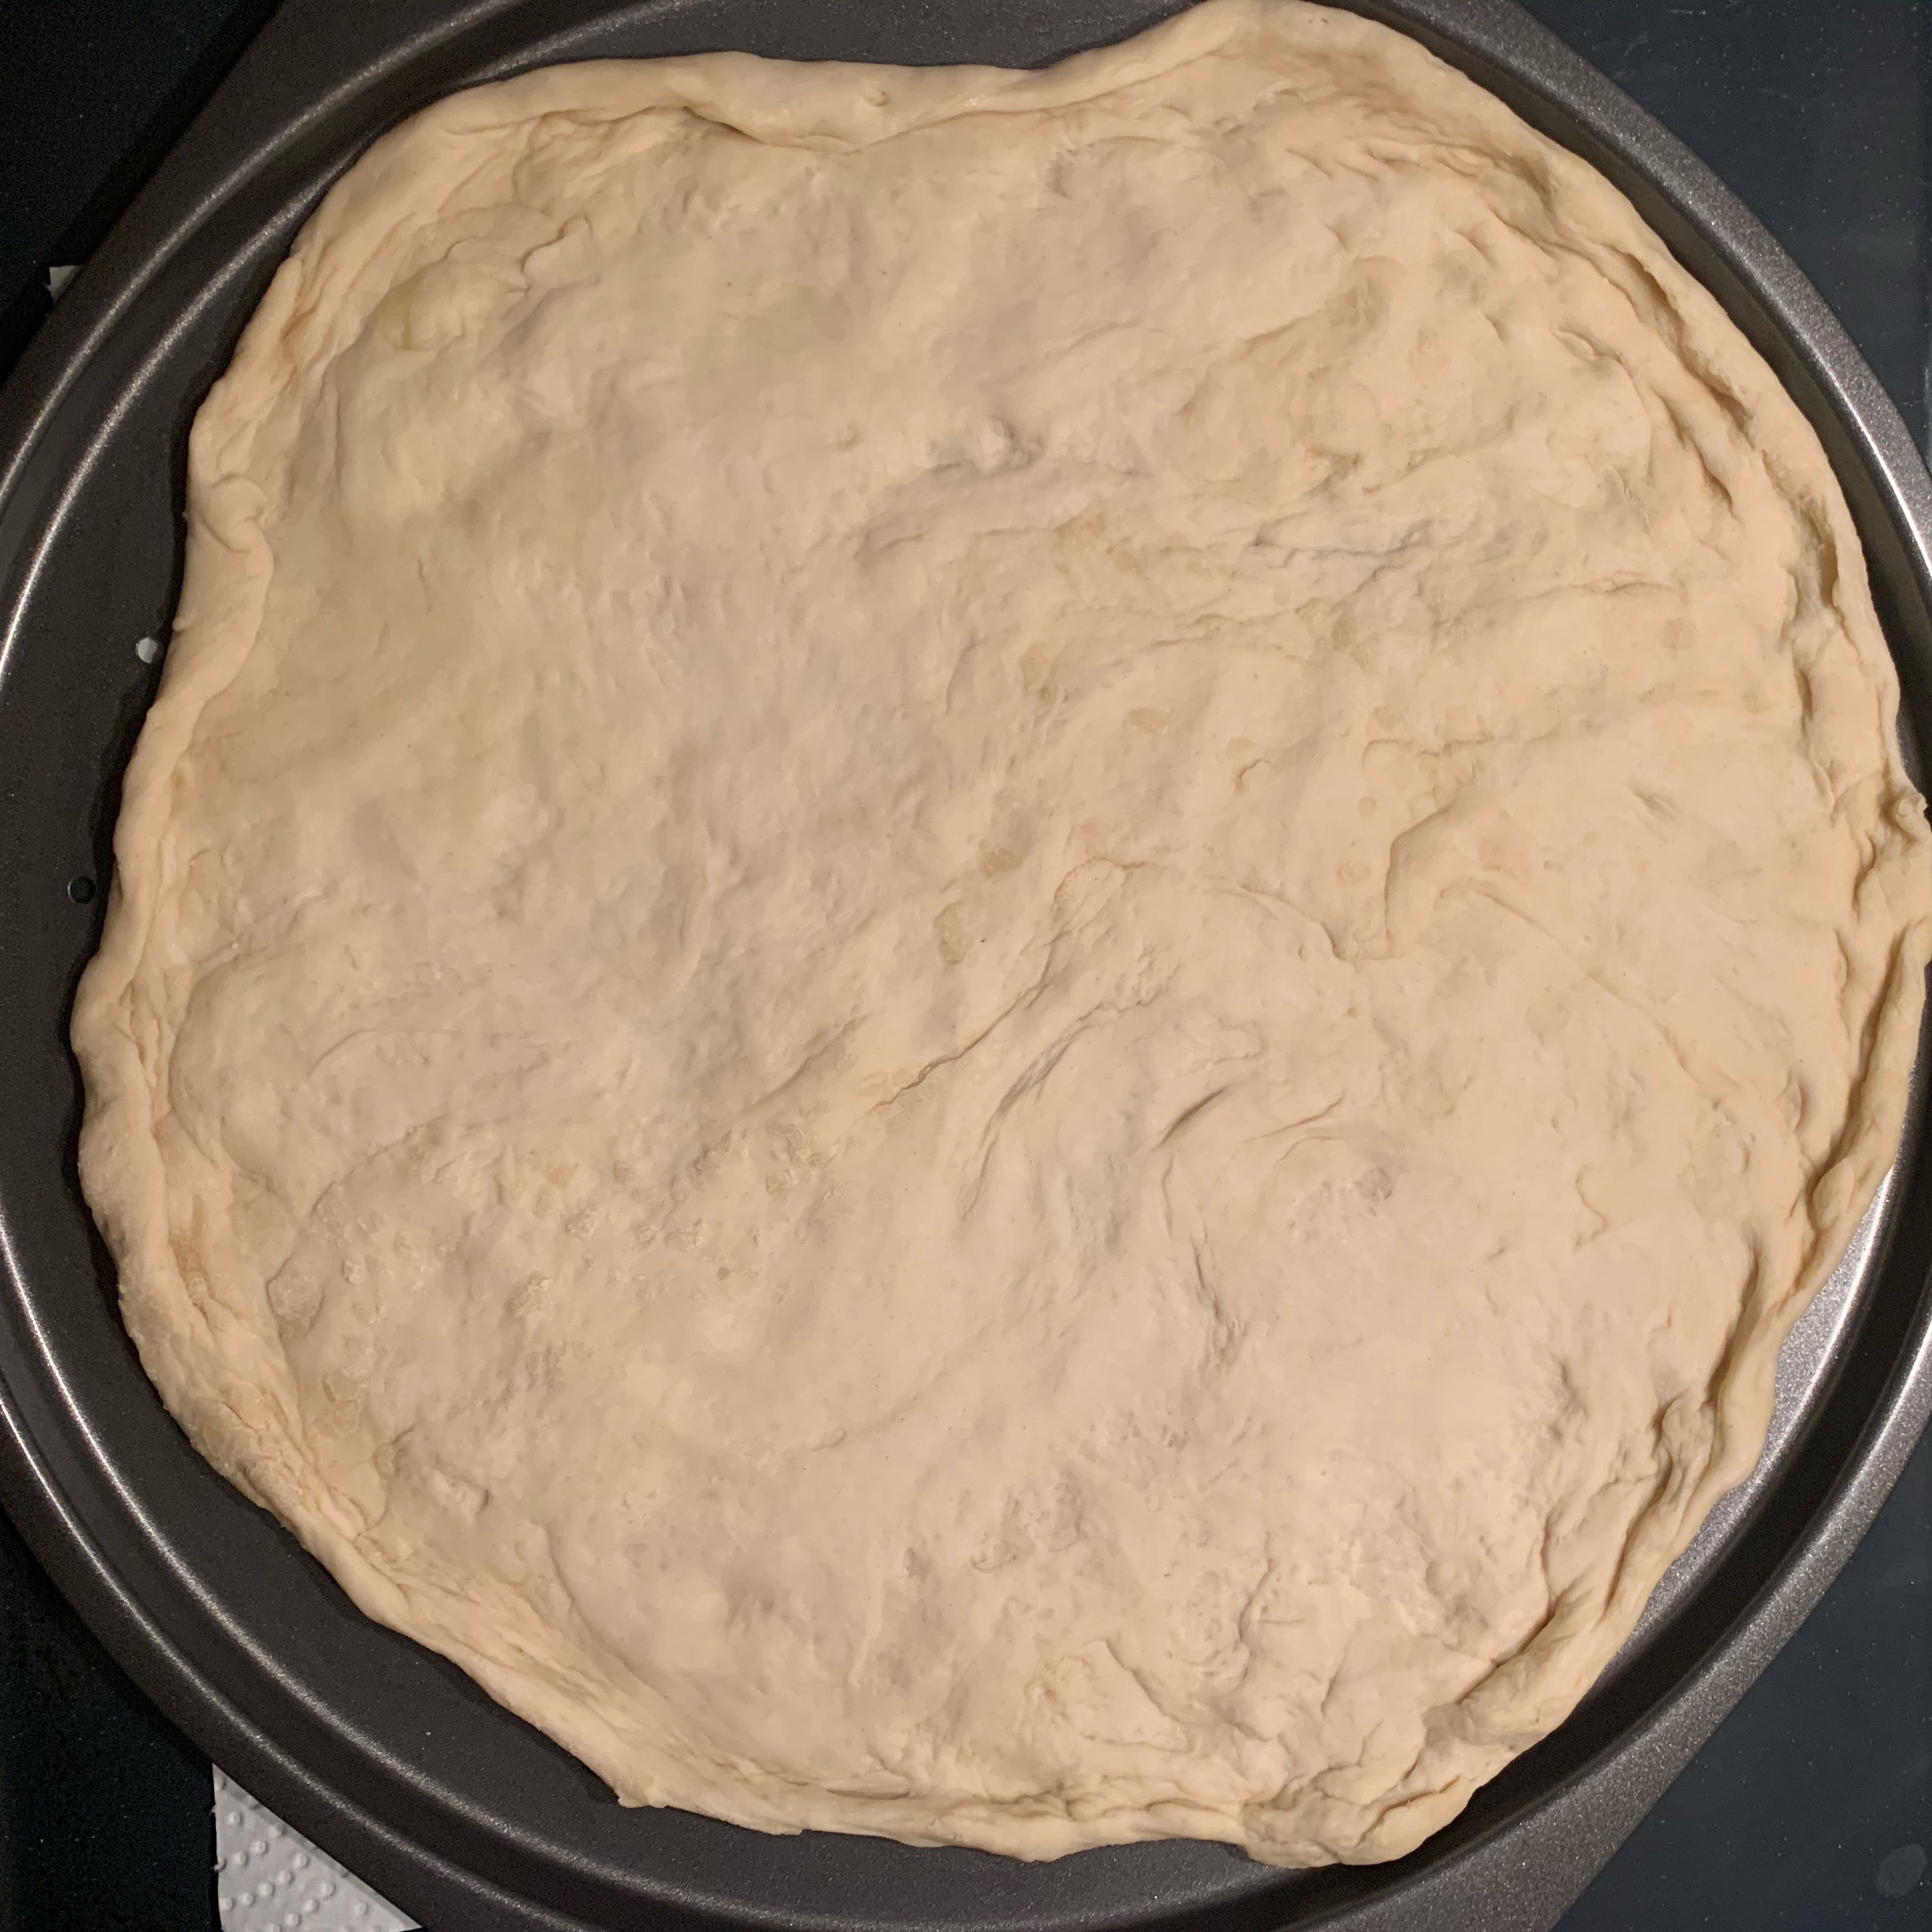 Roll out the dough on an oiled baking dish or pizza tray. (Here I have used half of the dough to make two separate pizze). 